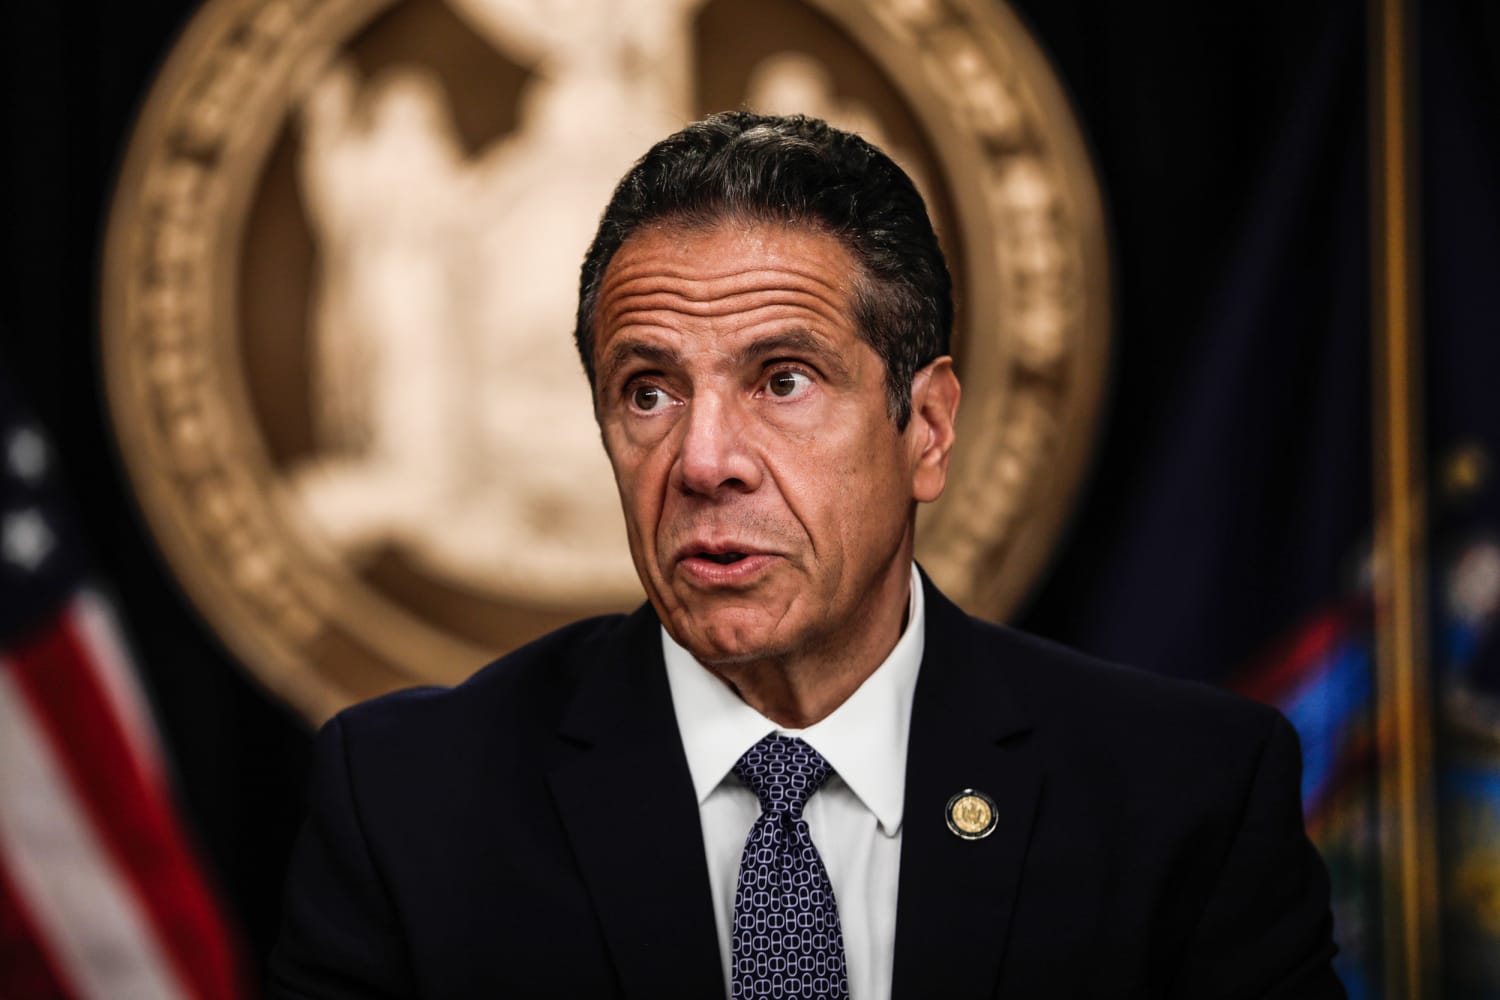 Albany prosecutor drops groping charge against former N.Y. Gov. Andrew Cuomo